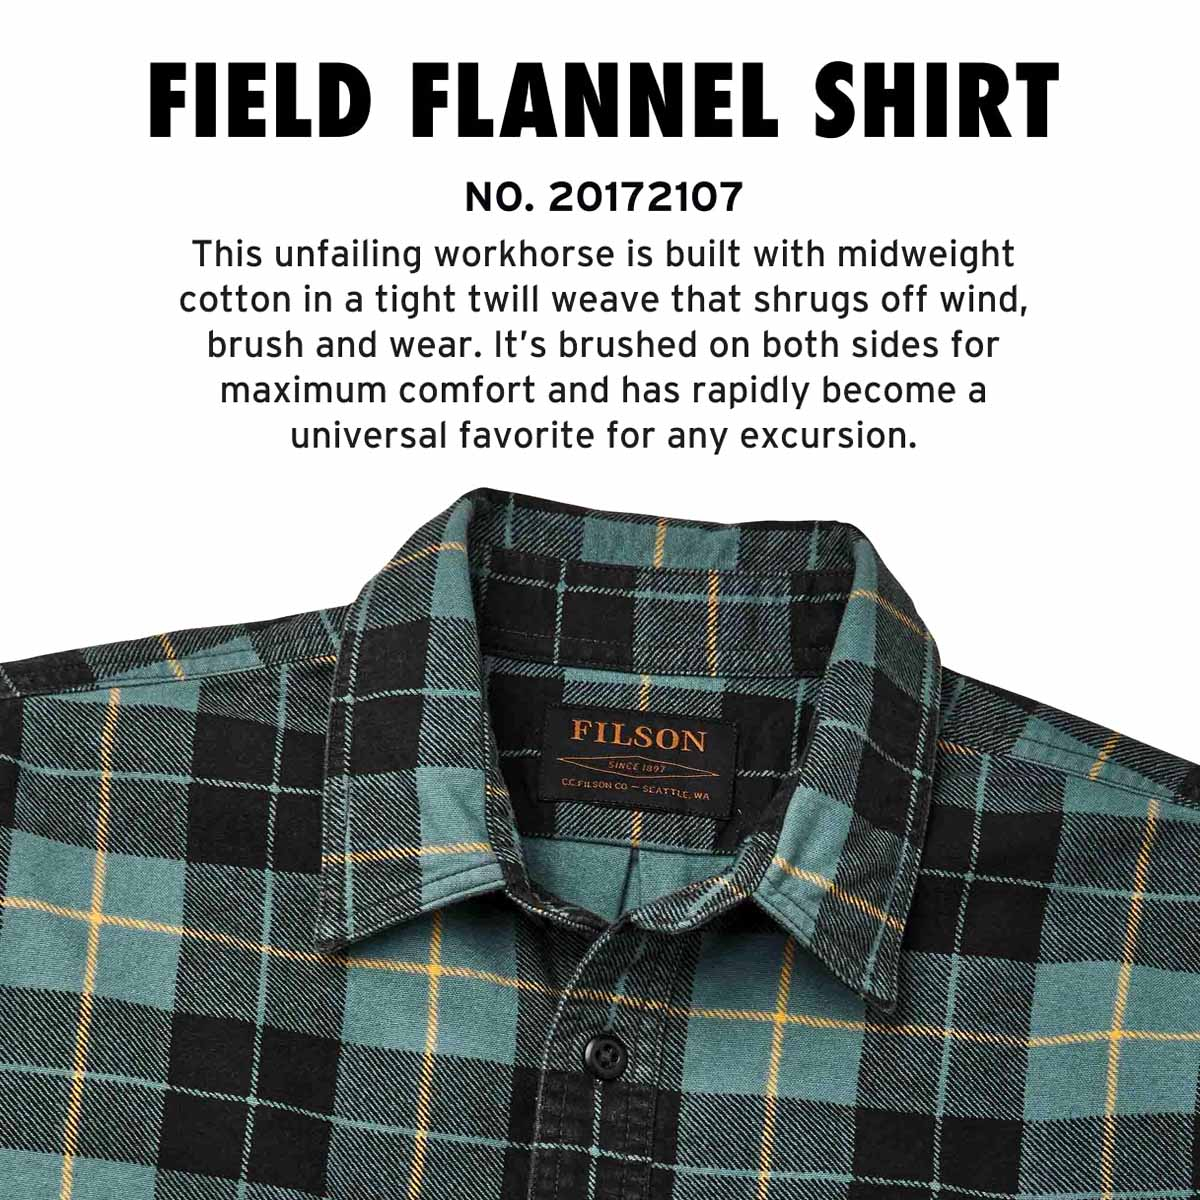 Filson Field Flannel Shirt Northcoast Green Print, iconic shirt in the making